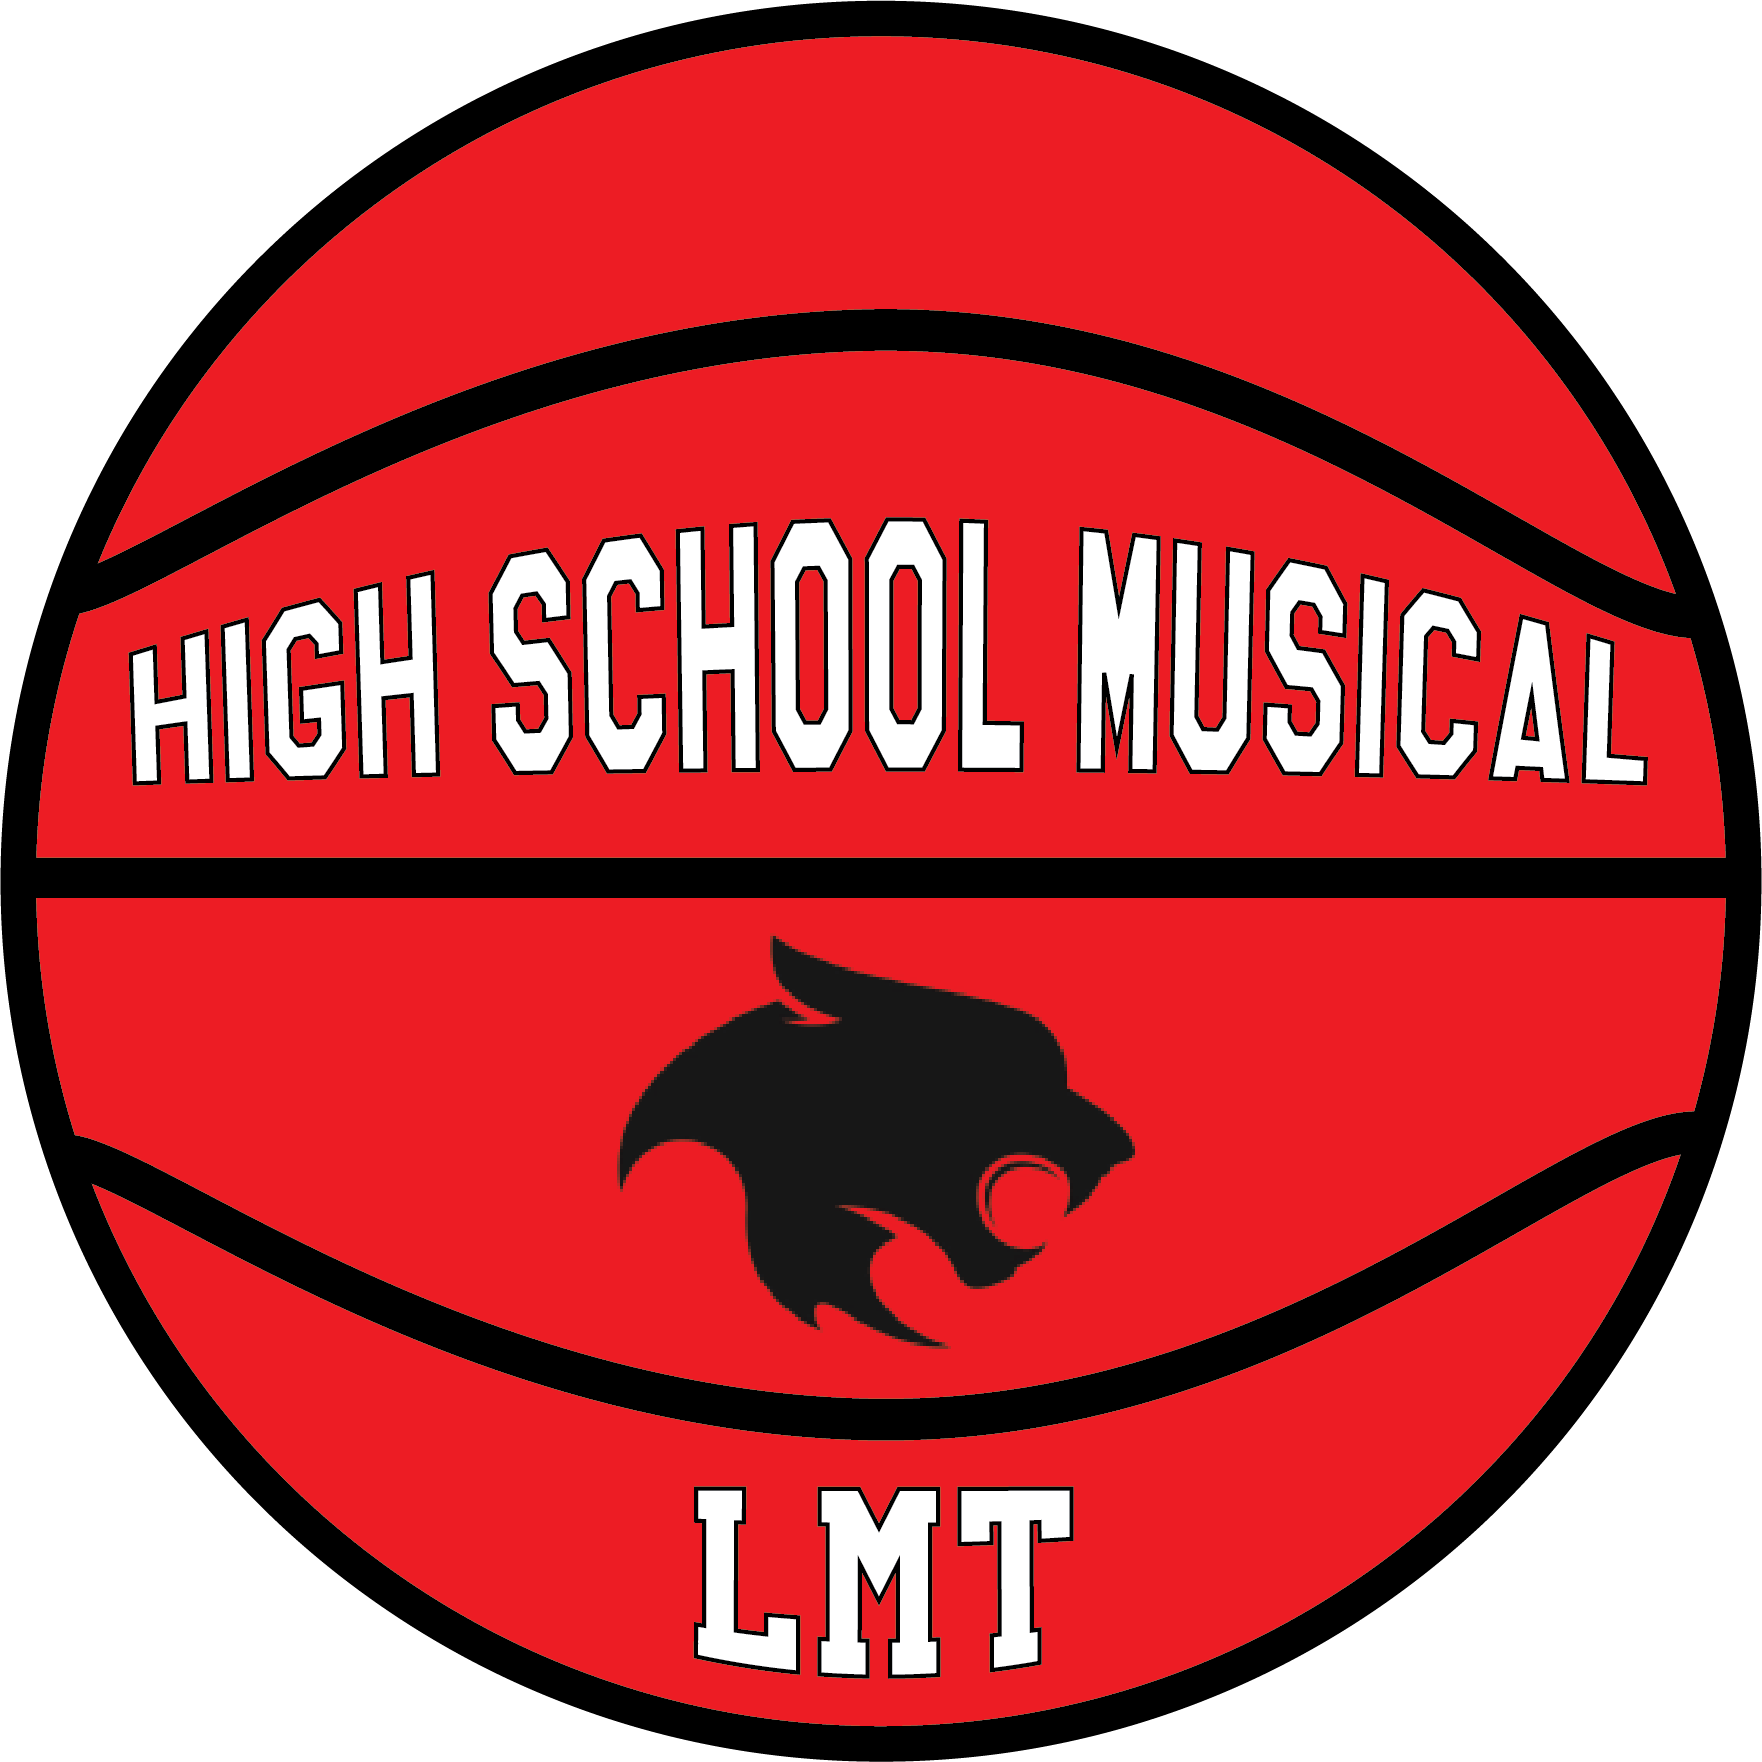 Laurier’s student-run production of “High School Musical” will hit the stage this January